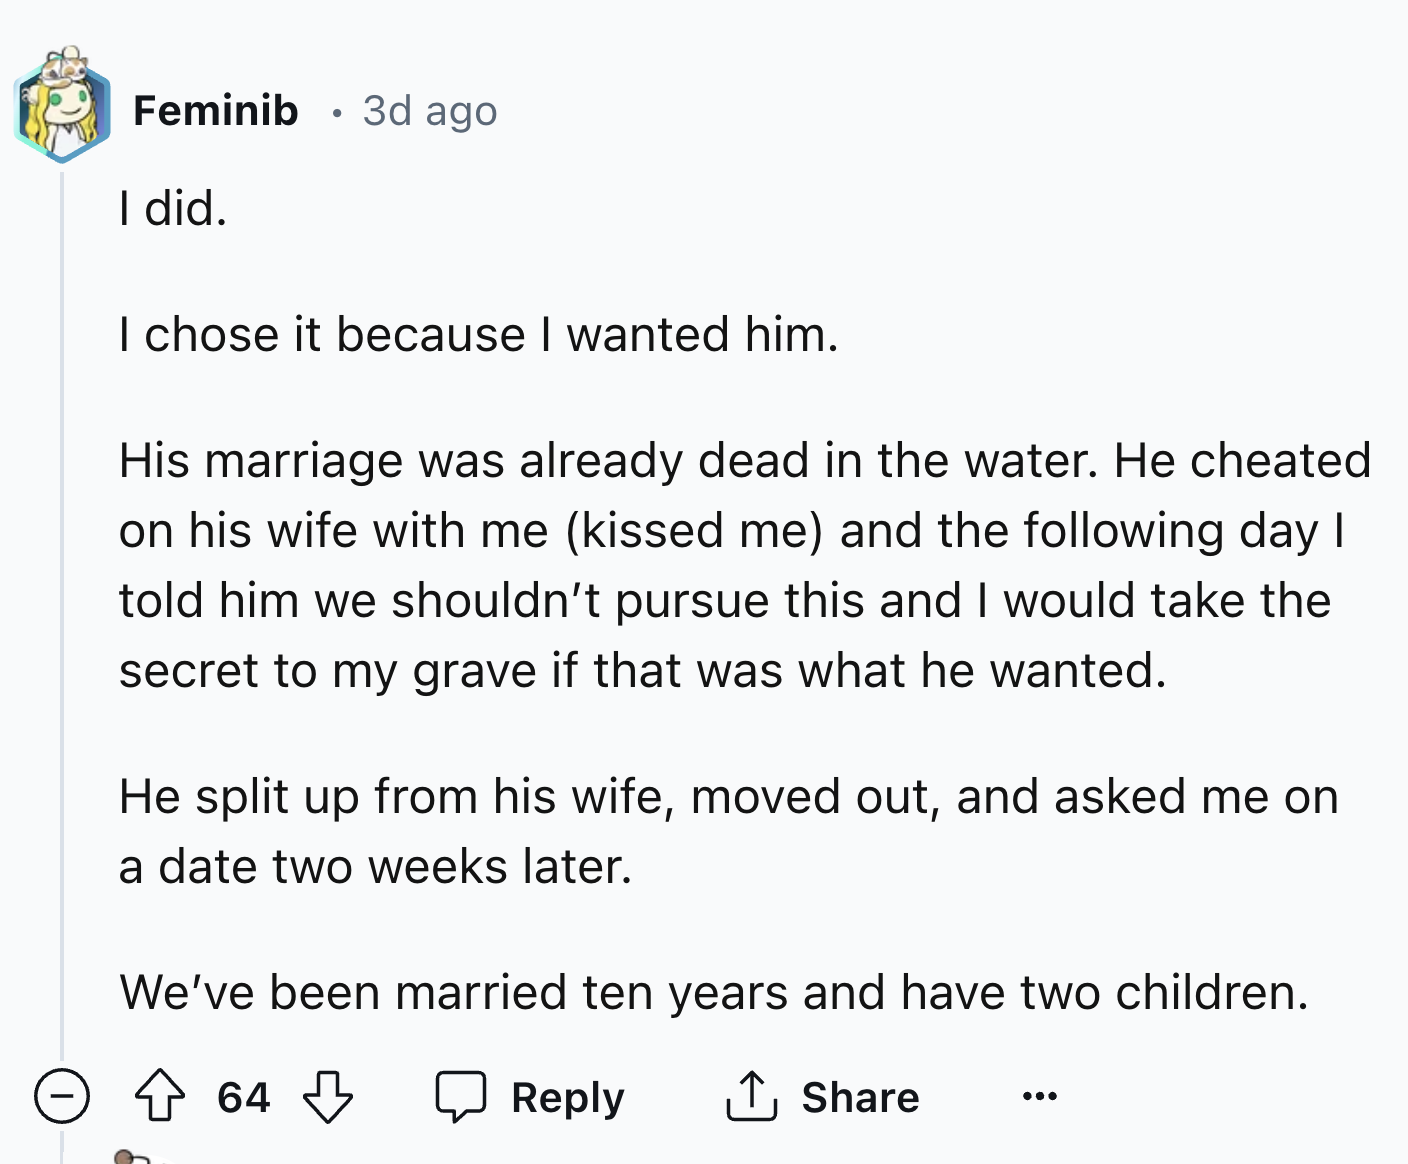 screenshot - Feminib 3d ago I did. I chose it because I wanted him. His marriage was already dead in the water. He cheated on his wife with me kissed me and the ing day I told him we shouldn't pursue this and I would take the secret to my grave if that wa